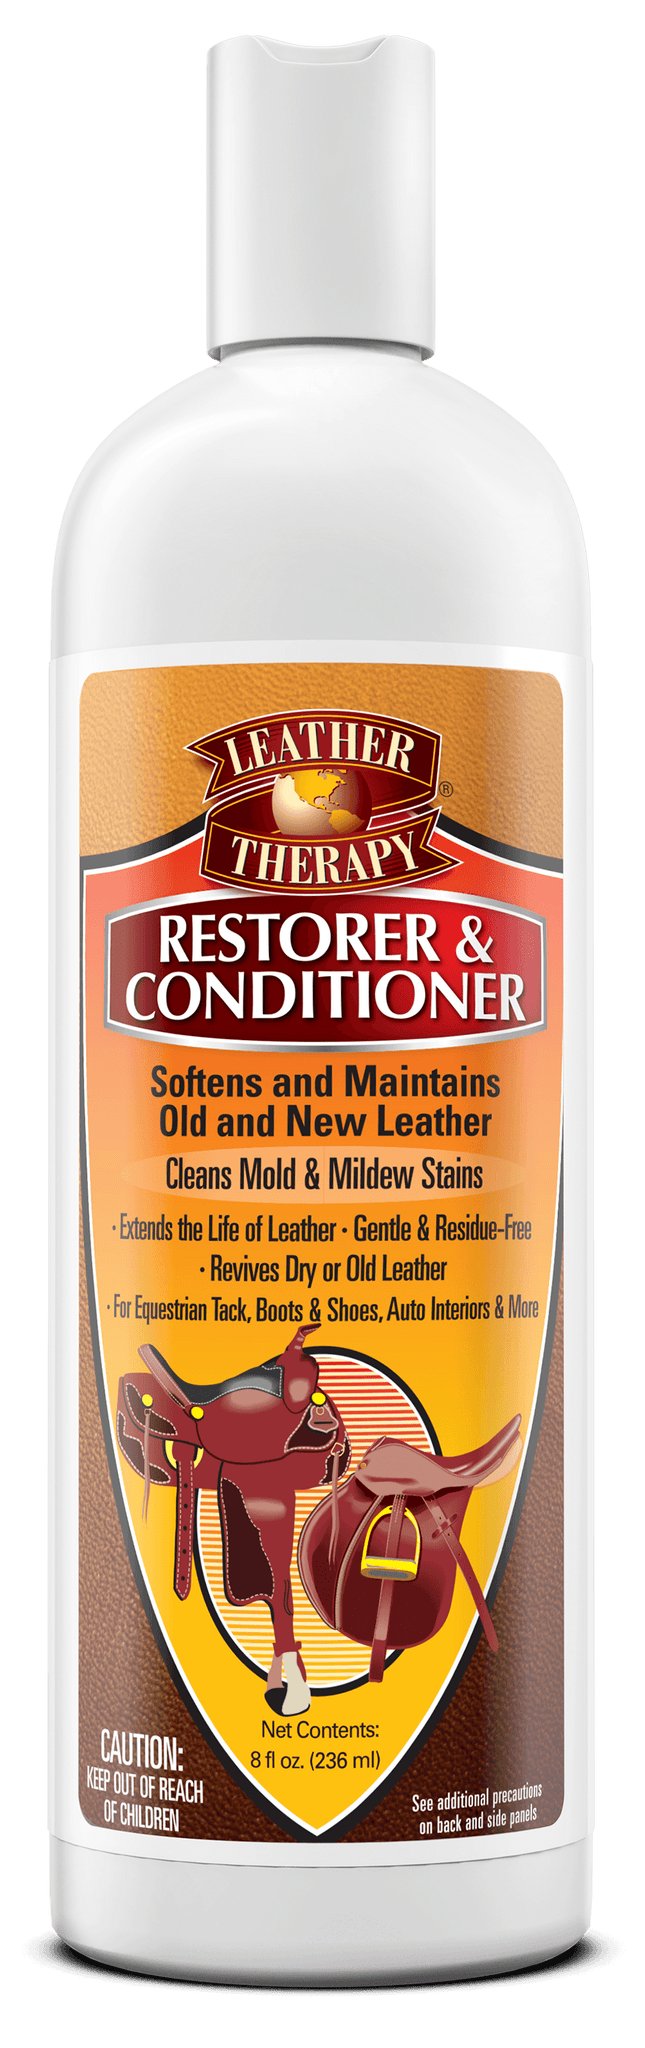 Leather Therapy Restorer & Conditioner. Softens and maintains old and new leather. Cleans mold & mildew stains. Extends the life of leather, gentle and residue free 8 ounce fluid bottle.